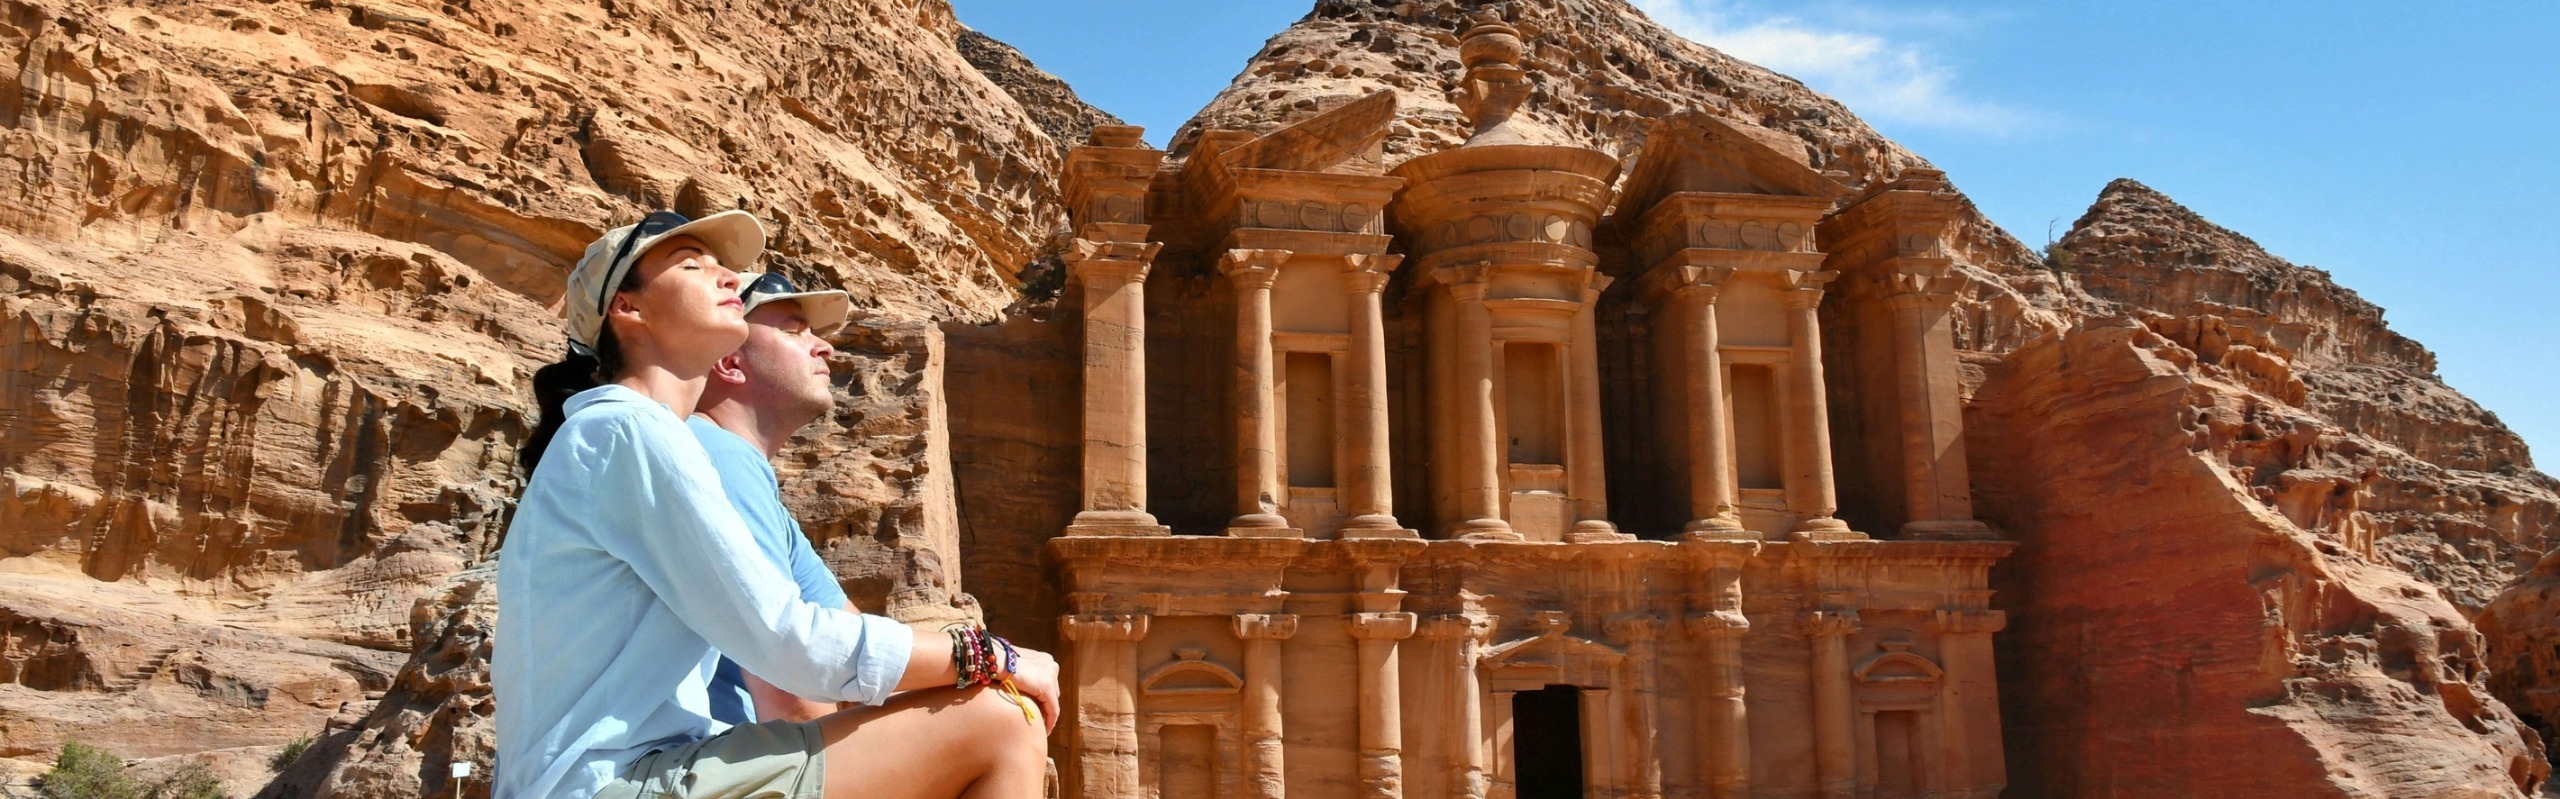 18-Day Egypt Jordan and Israel's Treasures Discovery Tour